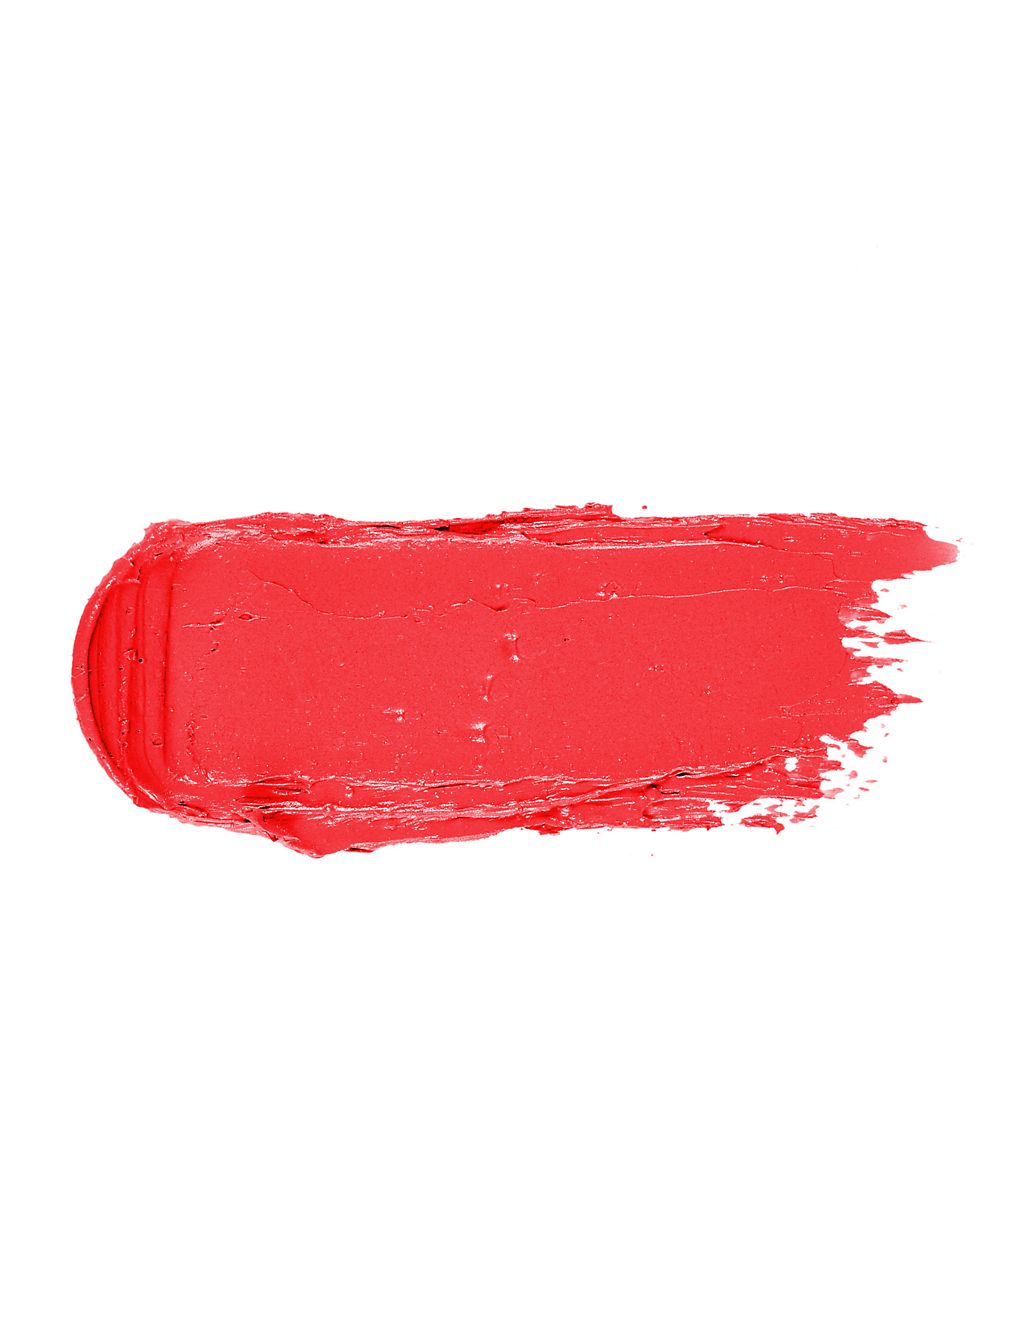 Hydrating Colour Drench Lipstick 1 of 3